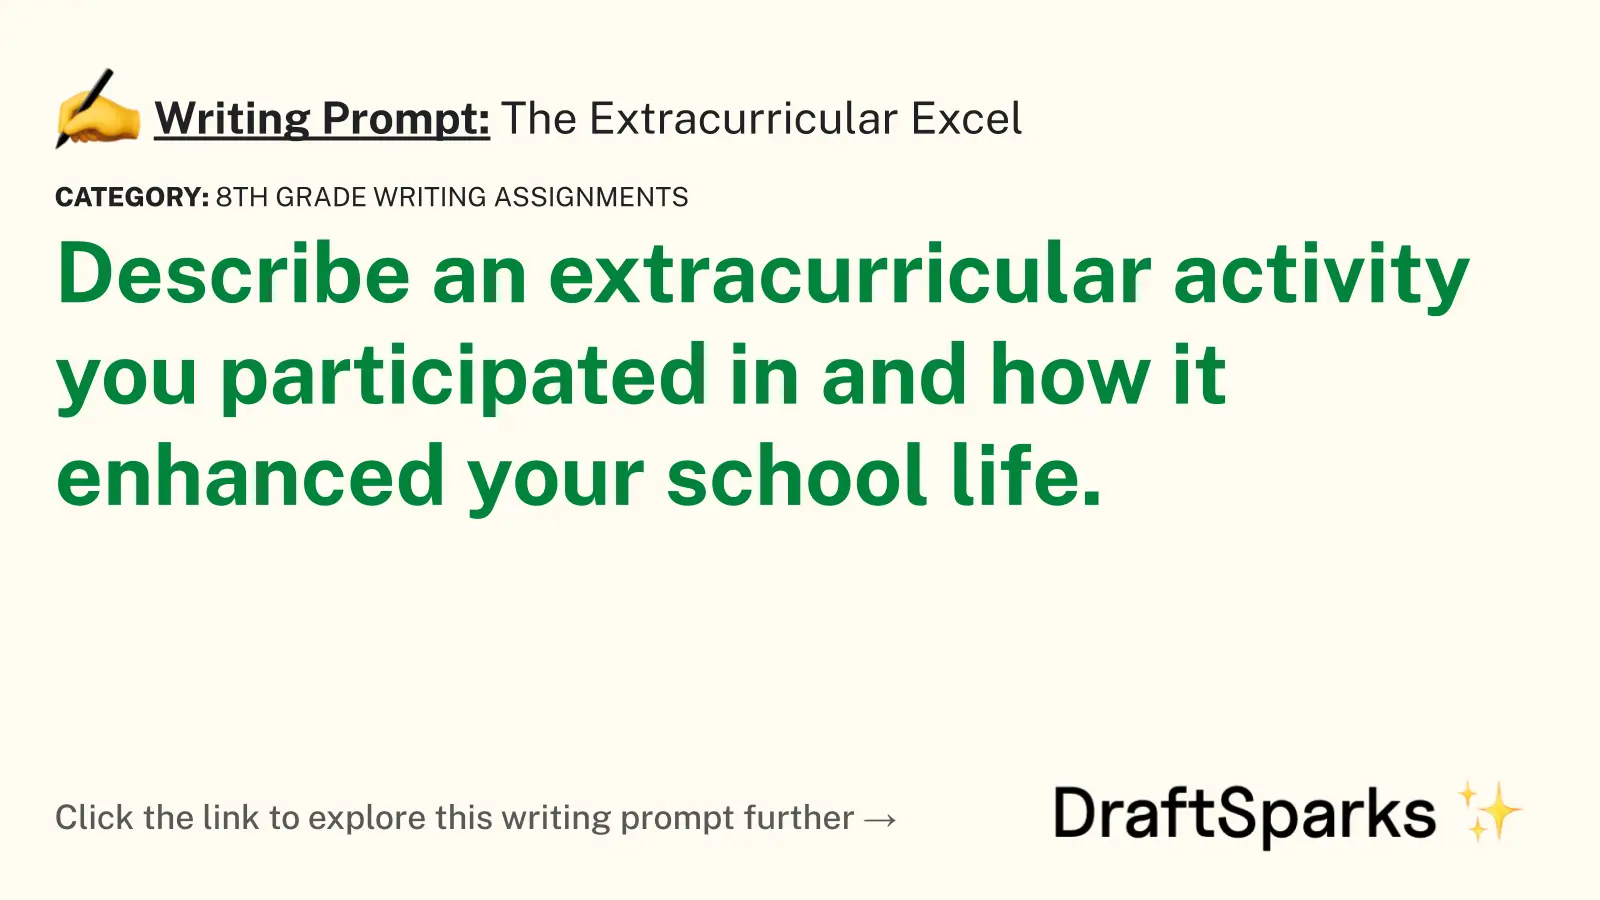 The Extracurricular Excel